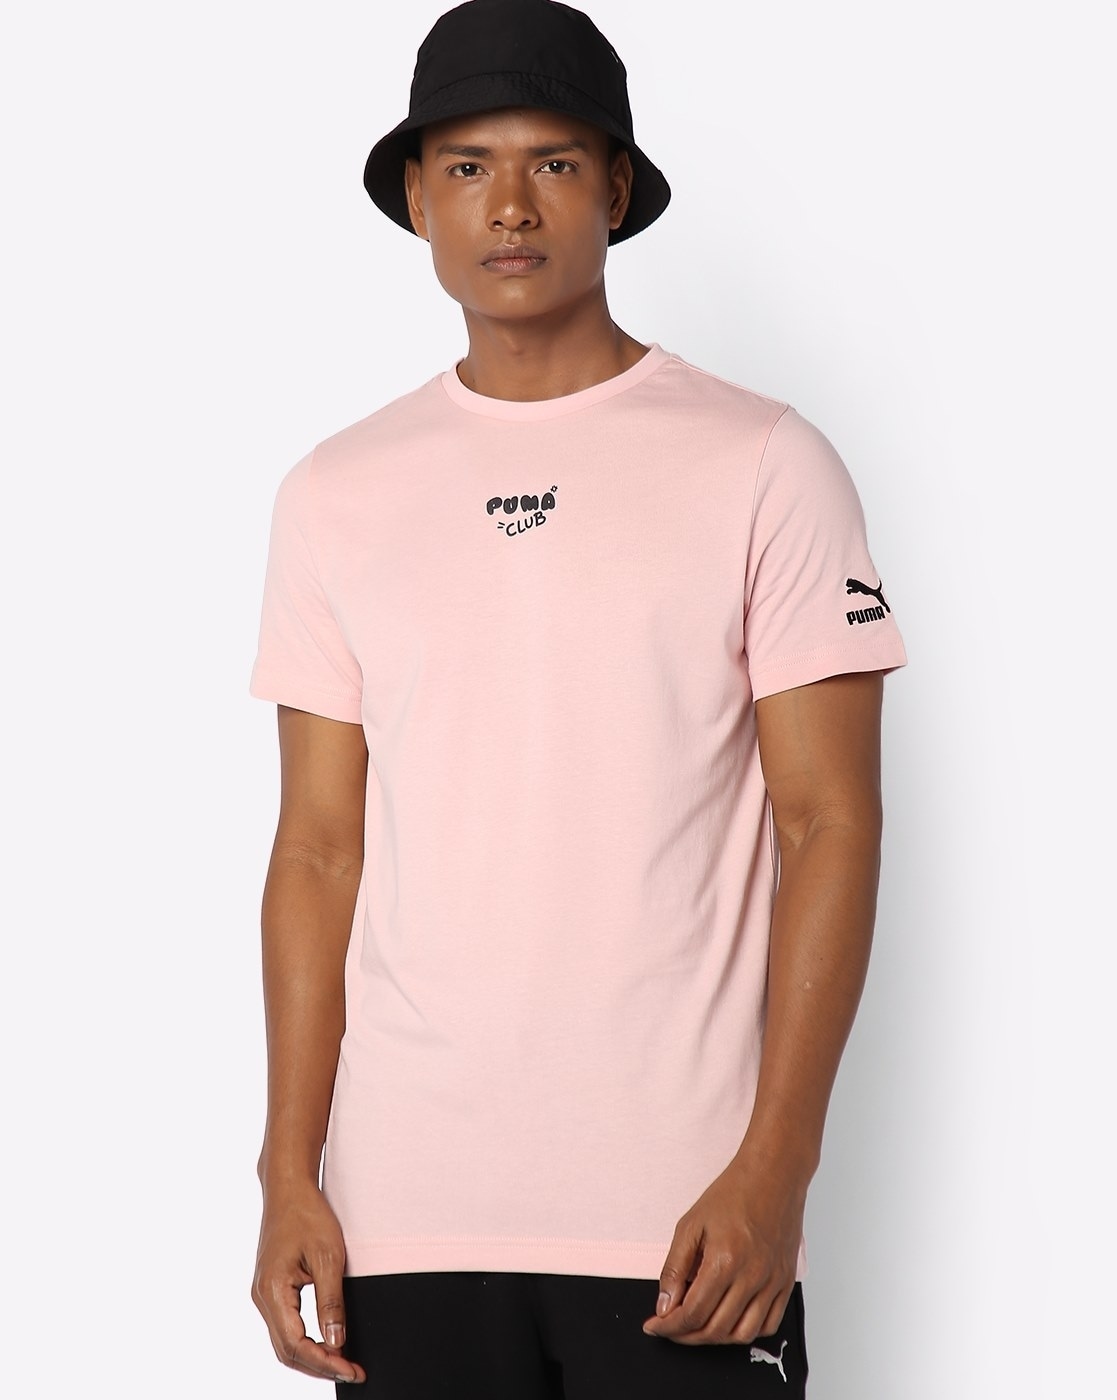 Buy Pink by for Tshirts Puma Online Men